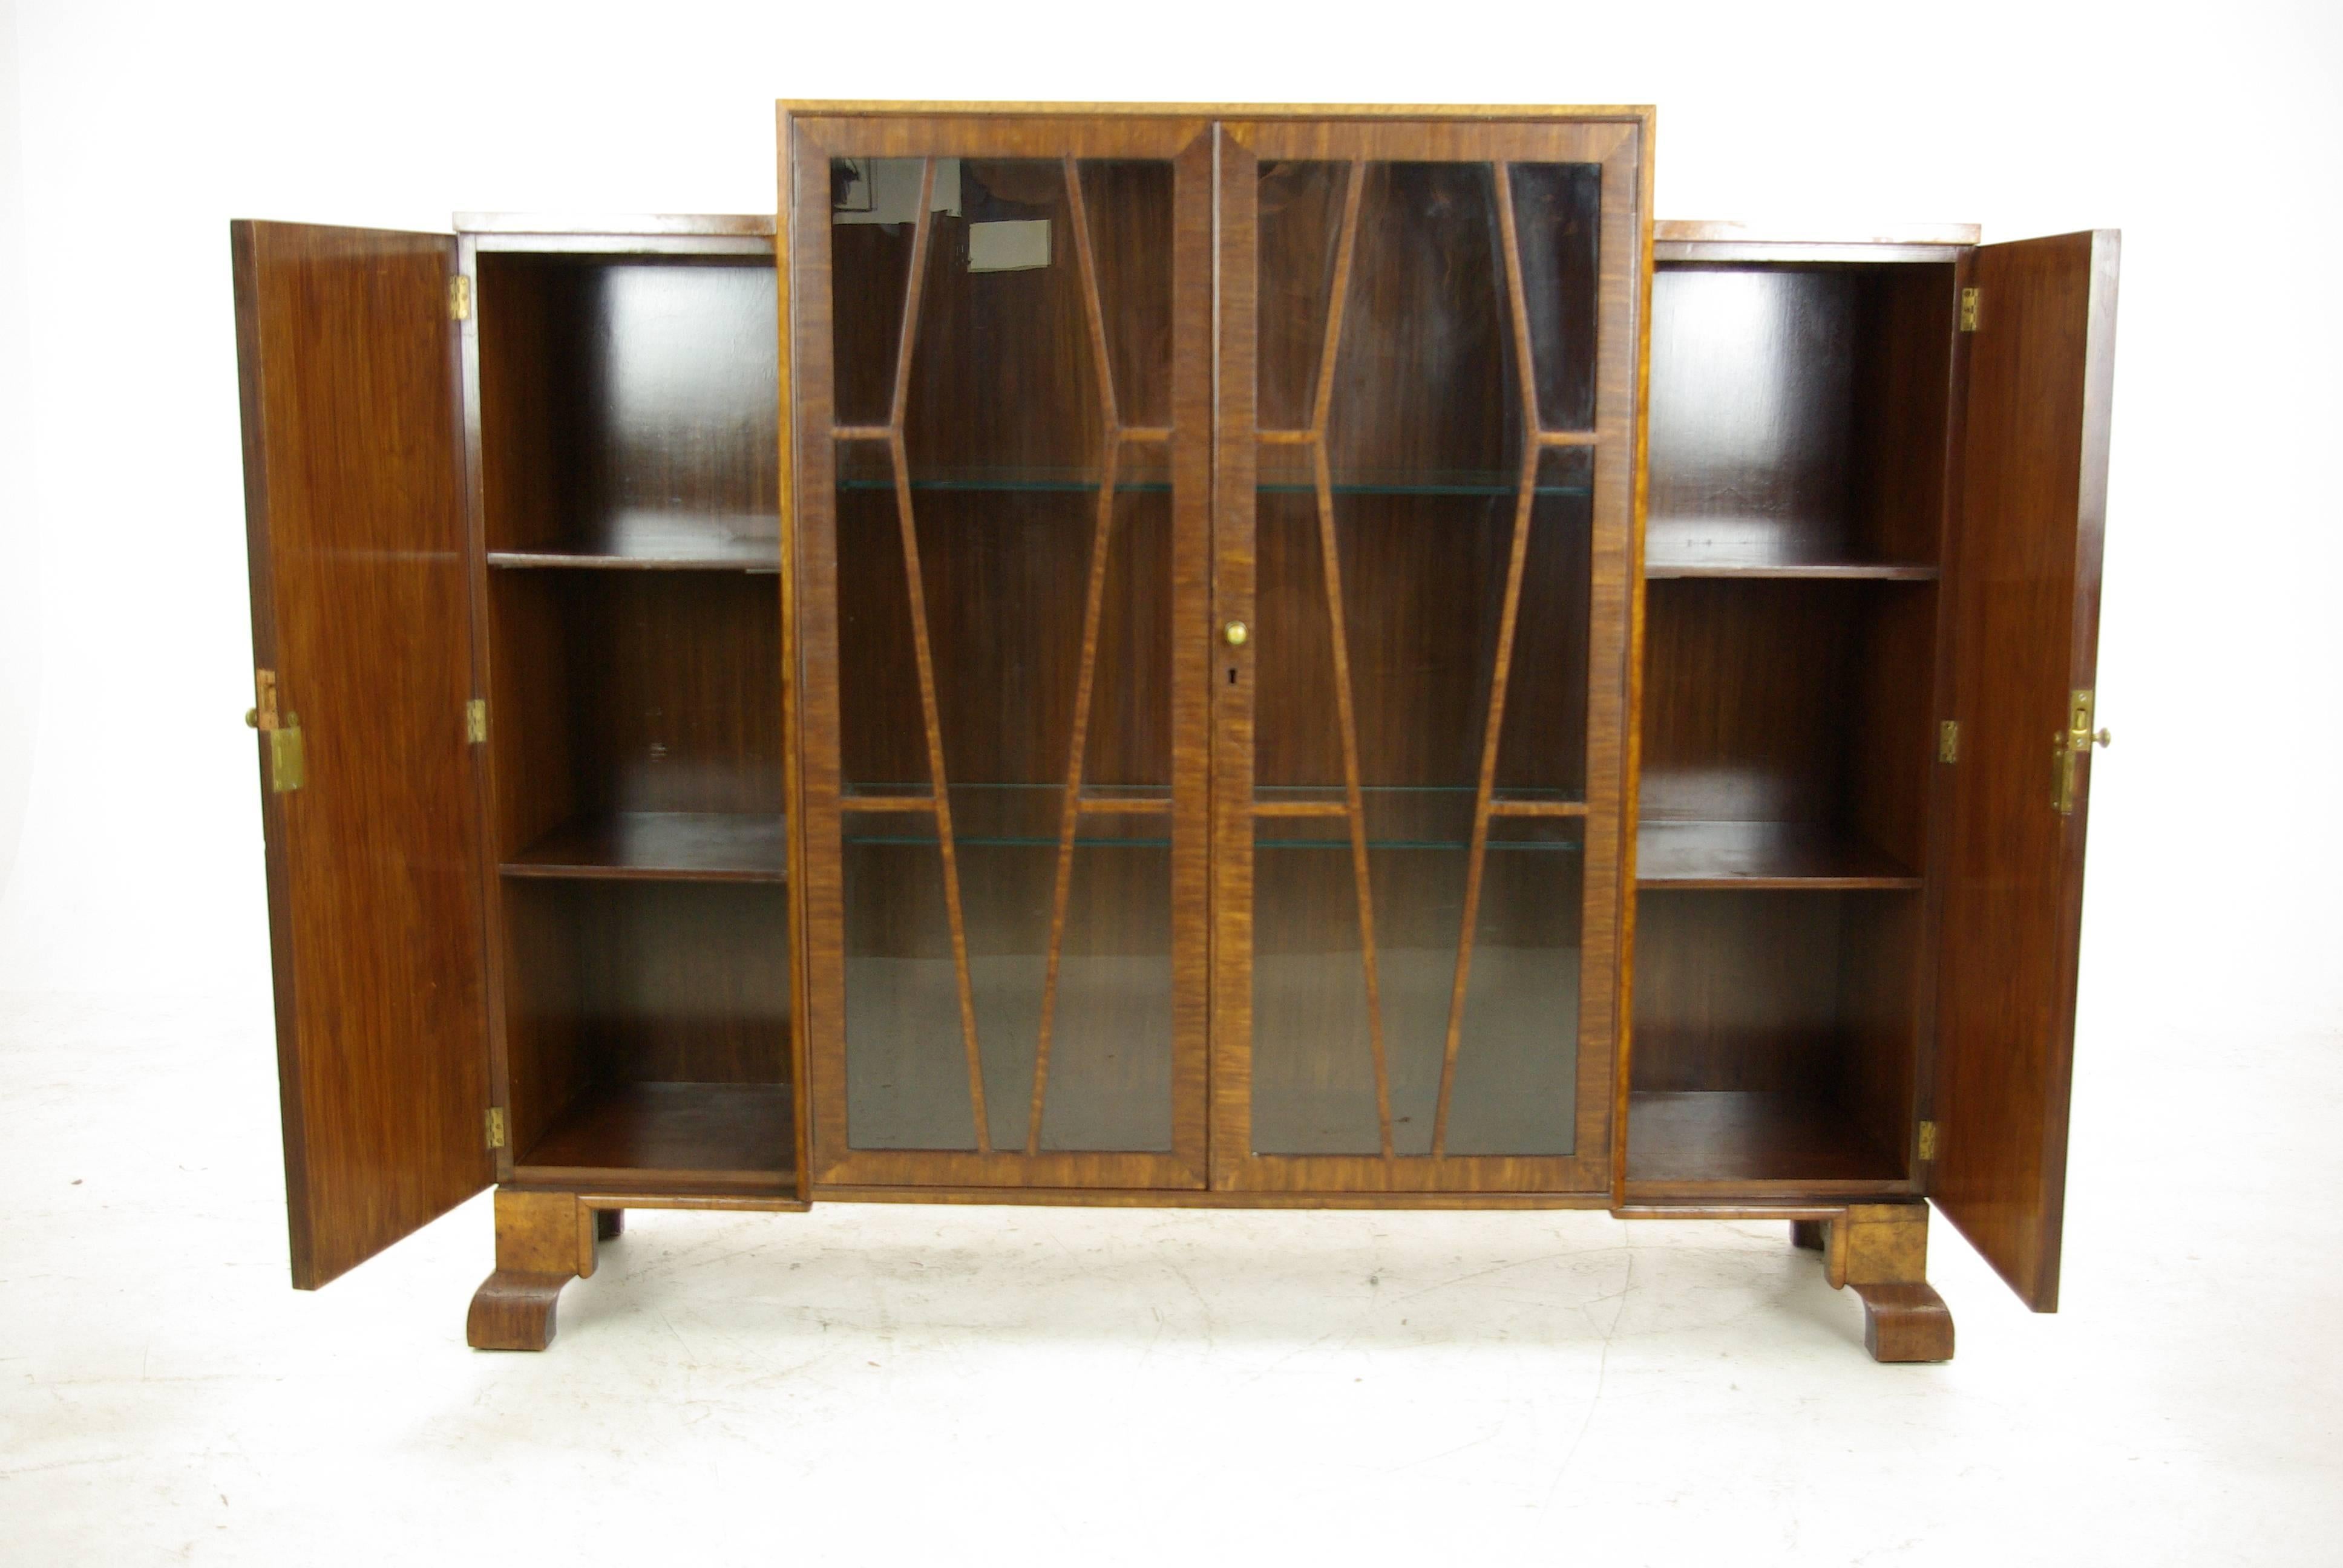 Antique walnut bookcase, Art Deco bookcase, Scotland 1930, Antique Furniture, B977.

- Scotland, 1930
- Solid walnut and veneers
- Figured burr walnut top
- Two glazed astragal doors
- Fitted with two adjustable glass shelves
- Flanked by